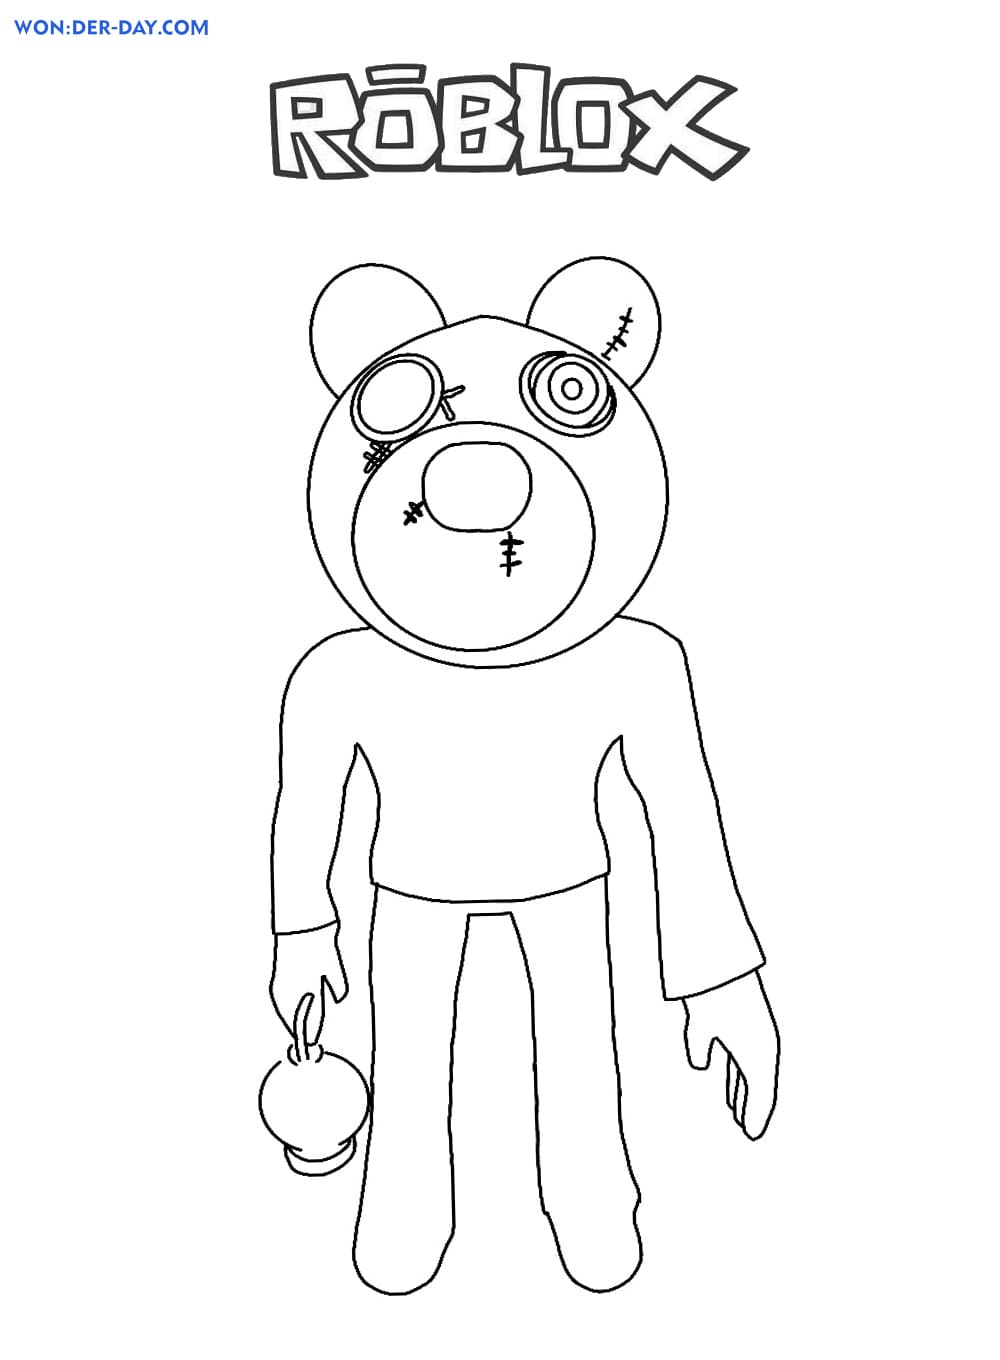 Piggy Roblox coloring pages WONDER DAY — Coloring pages for children